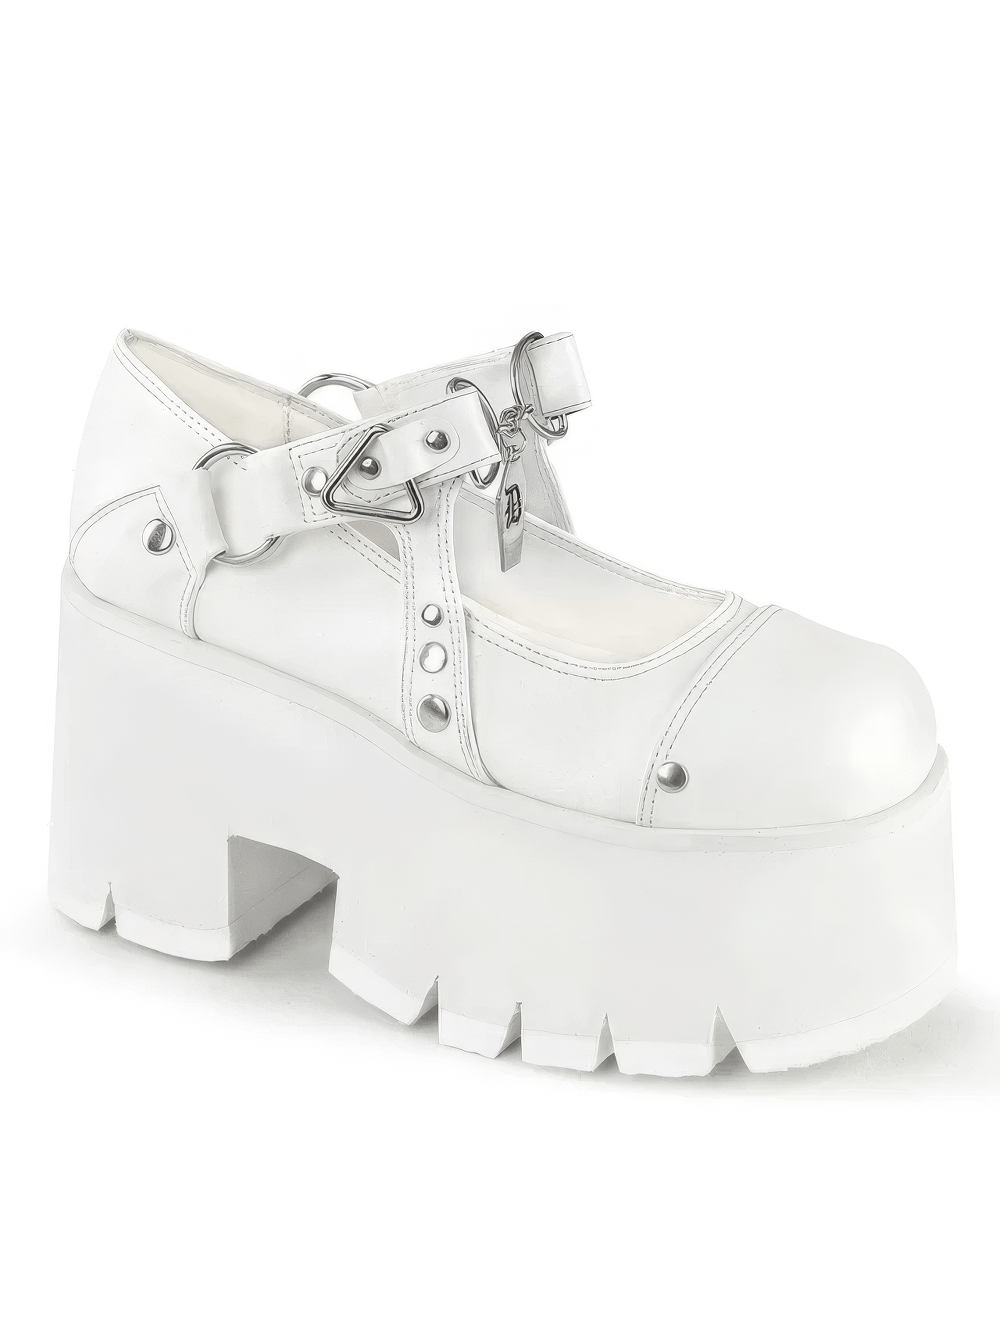 DEMONIA White Chunky Heel Platform Boots with Metal Accents